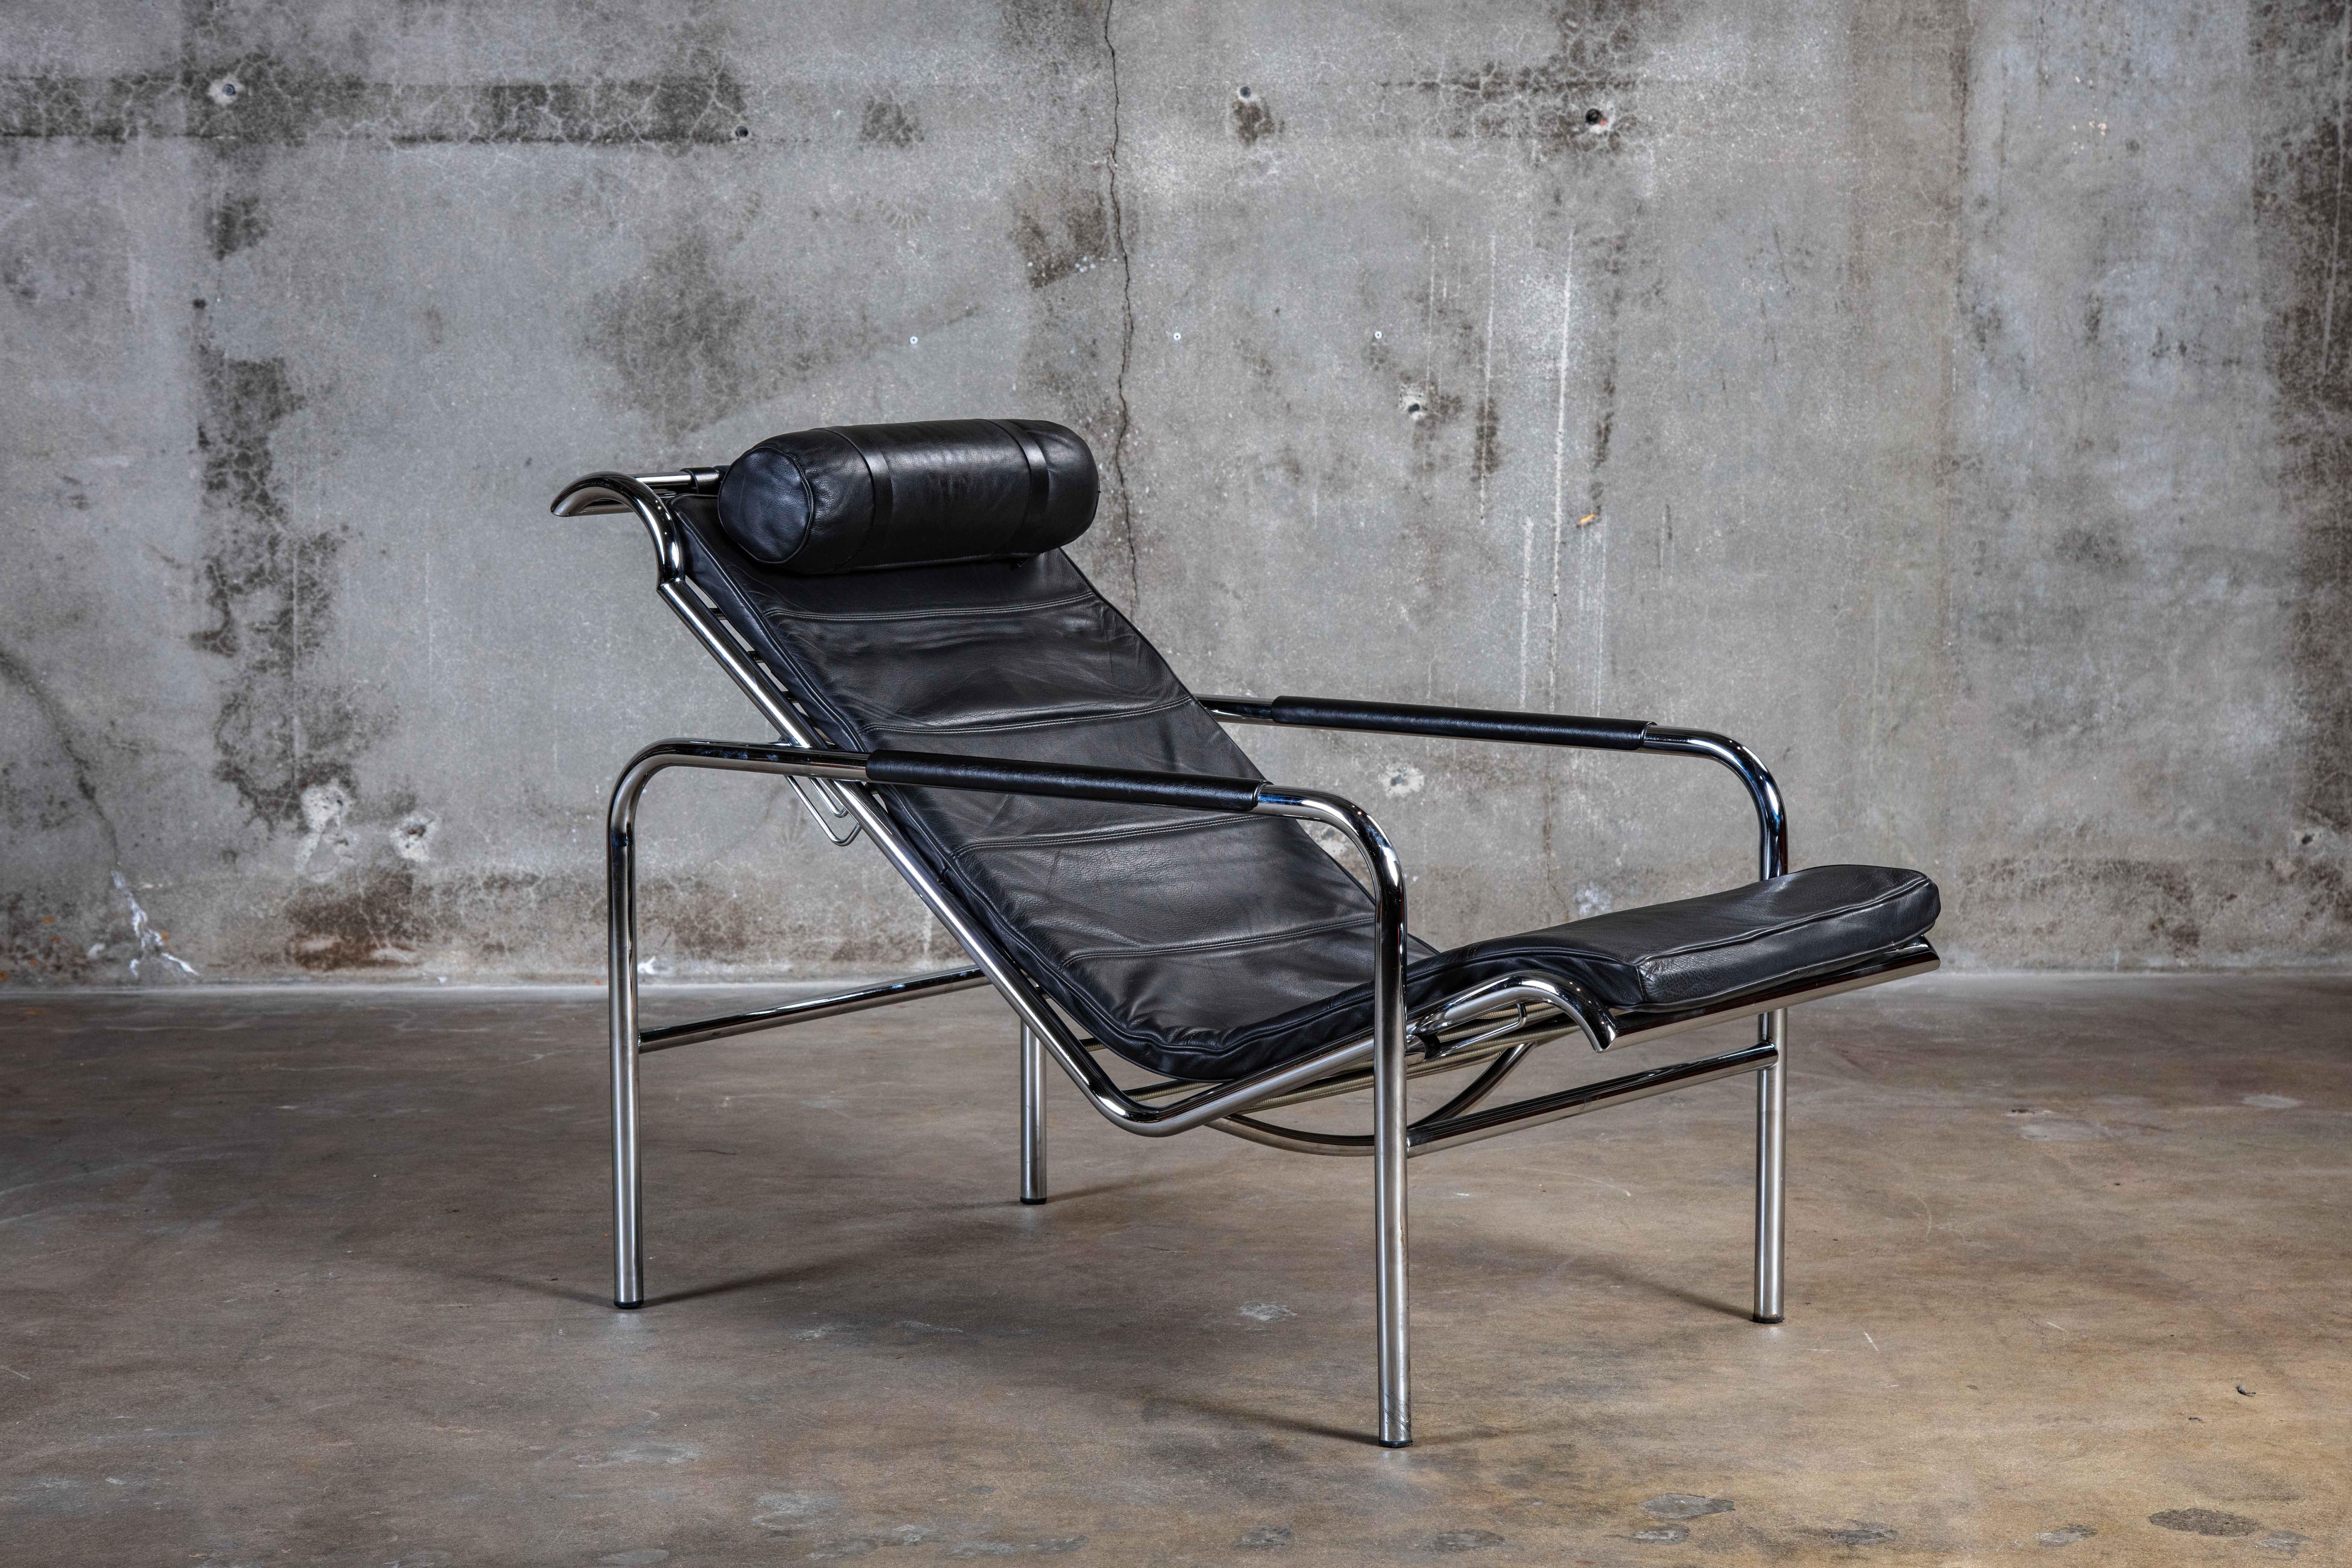 Gabriele Mucchi 'Genni' chaise lounge in chrome and leather.